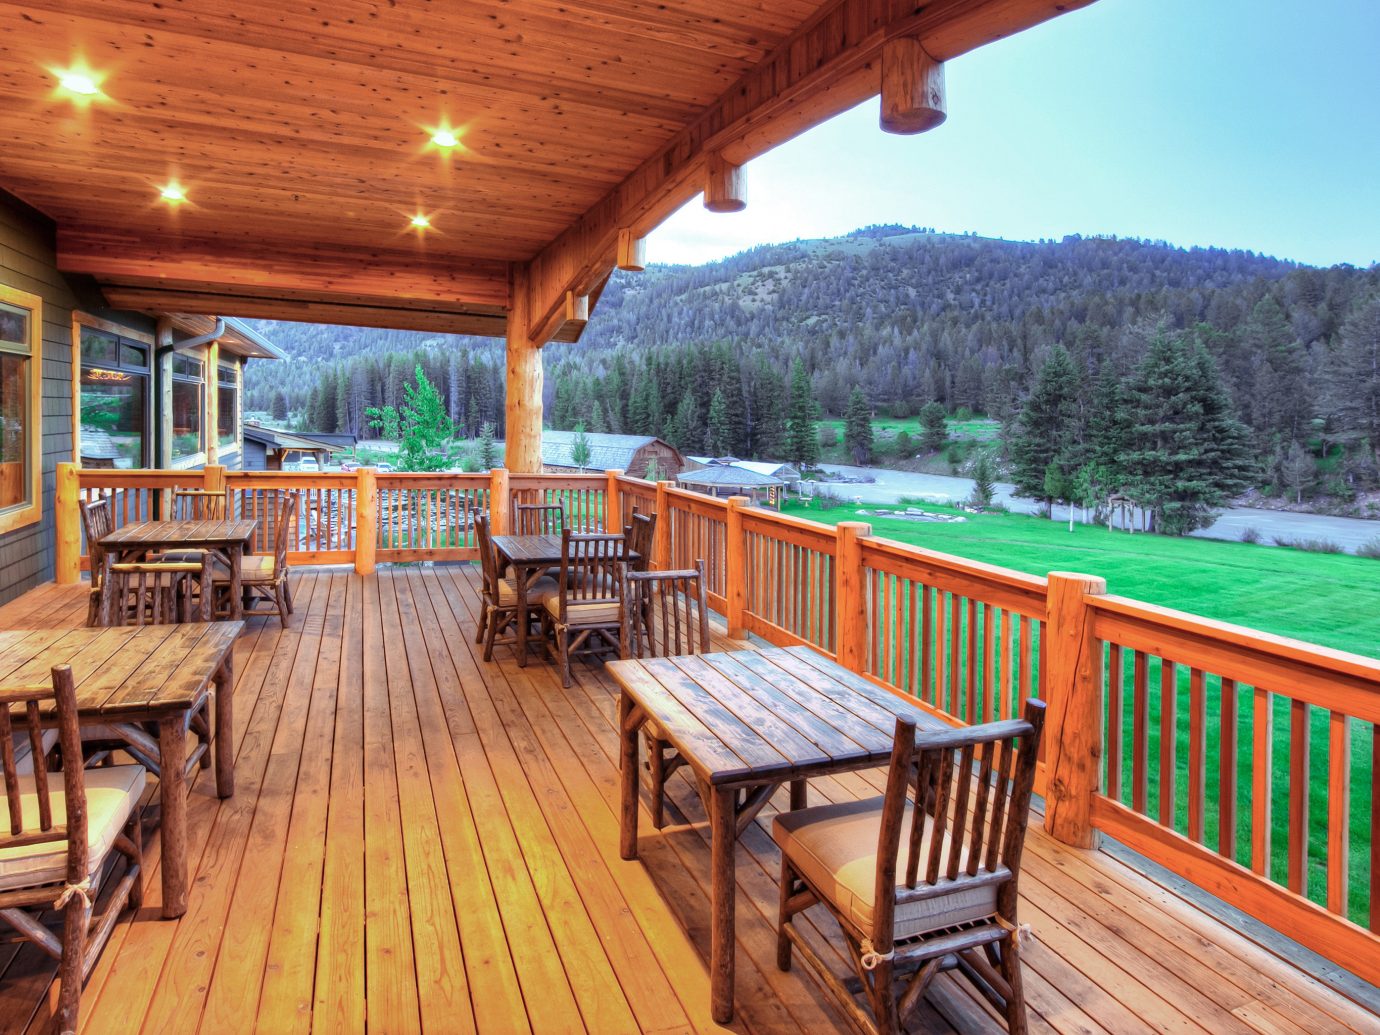 Country Deck Glamping Hotels Lodge Montana Outdoors + Adventure Patio Ranch Rustic Scenic views Trip Ideas wooden chair outdoor building property estate Resort cottage real estate outdoor structure Villa porch log cabin eco hotel wood area furniture